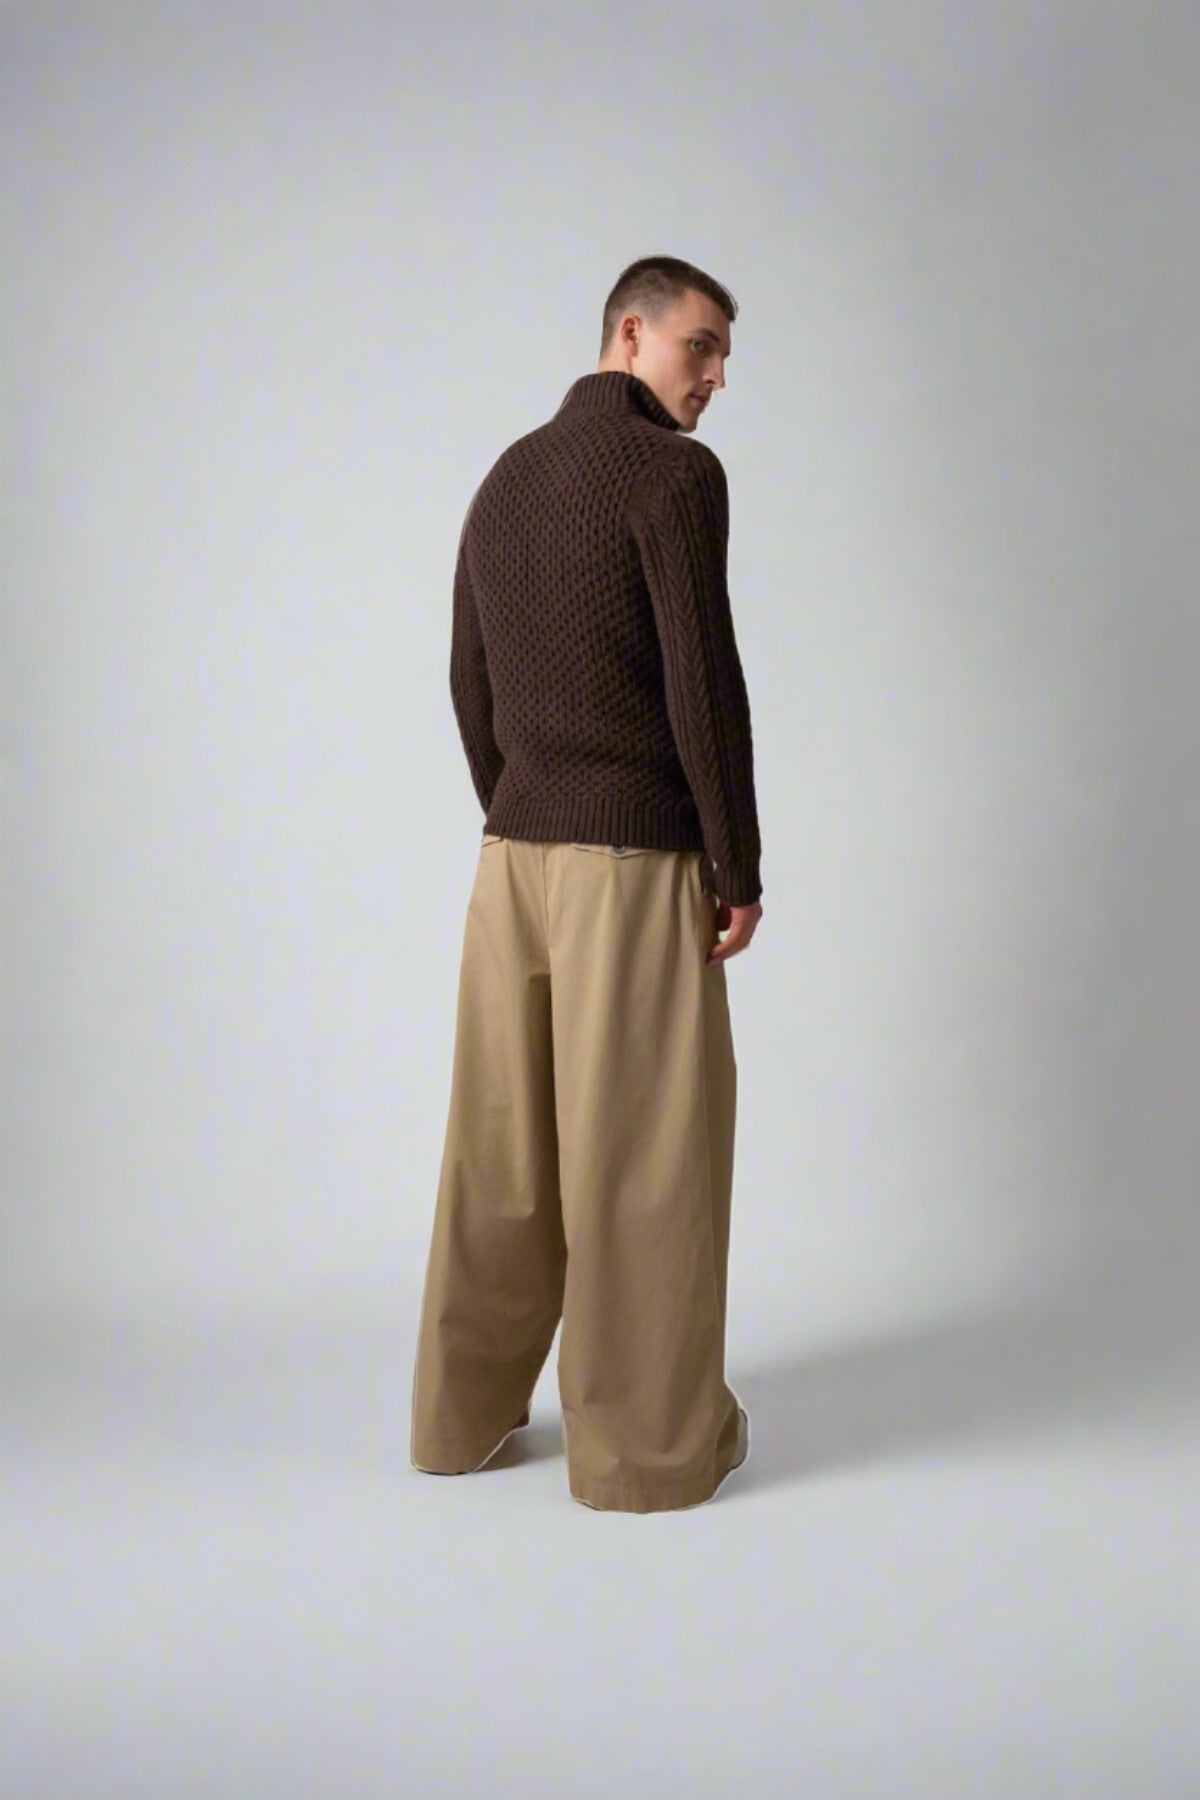 Johnstons of Elgin’s Men's Aran Cable Cashmere Zip Cardigan in Peat on model wearing wide camel trousers on a grey background KAI05119Q23708